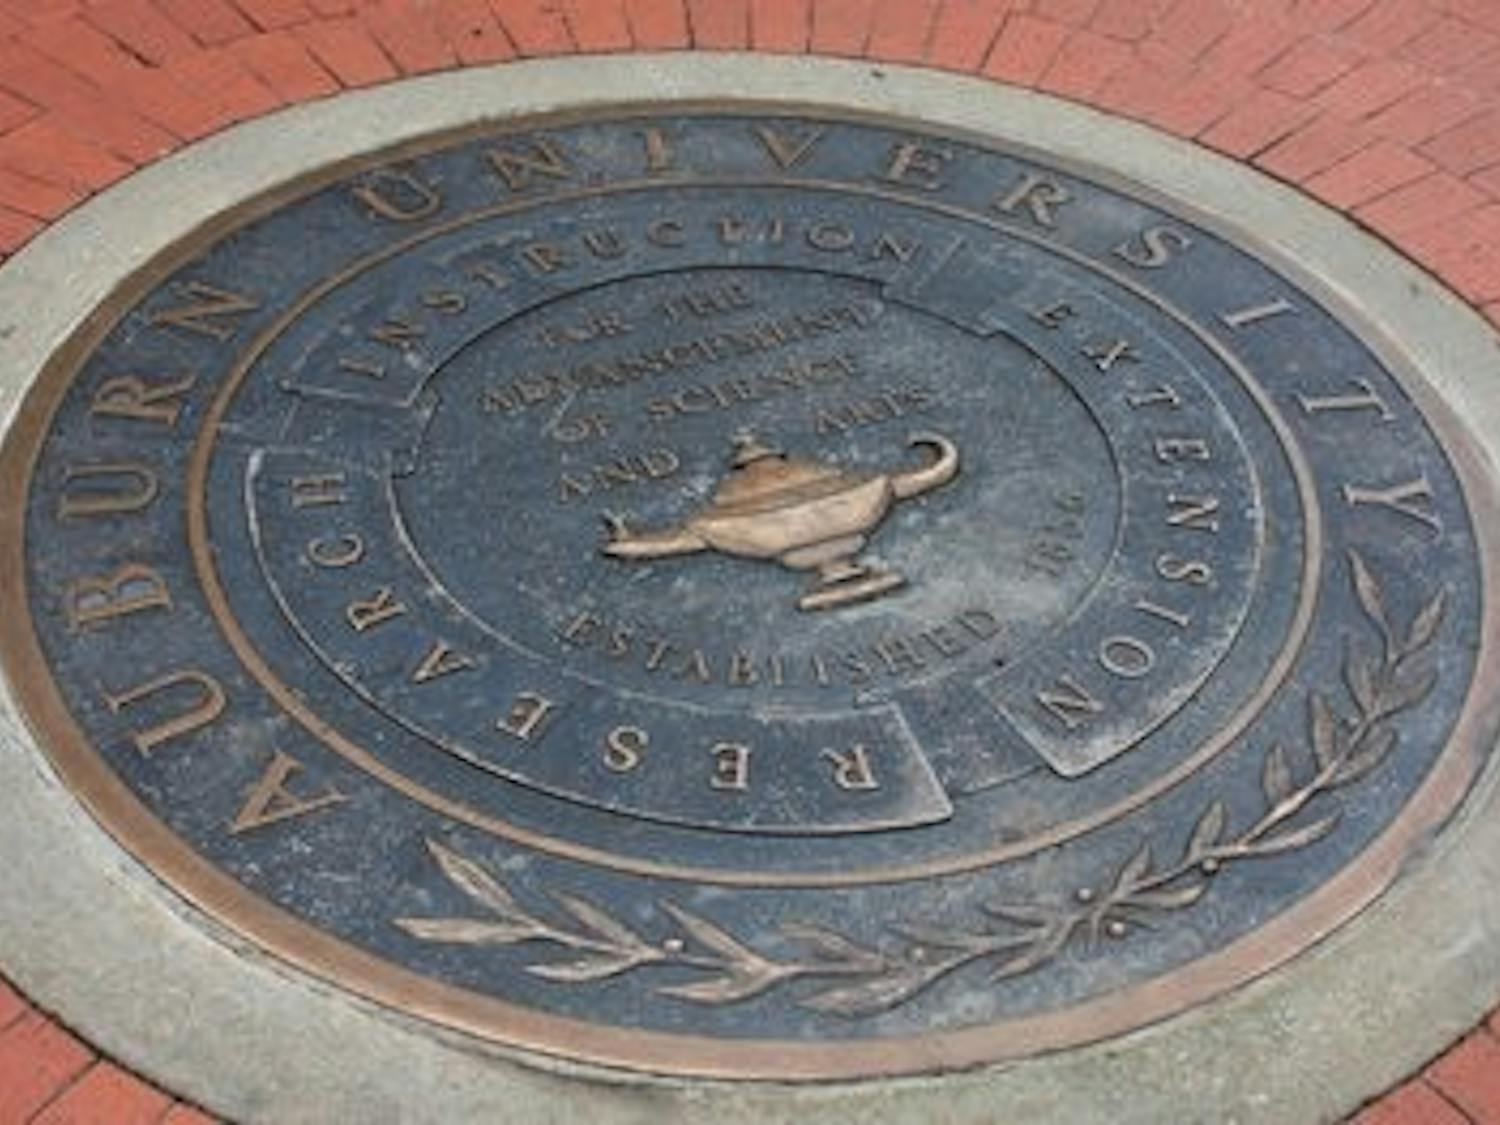 Legend has it that students who step on the Auburn seal he or she will not graduate on time or find their true love at Auburn. (Chelsea Wooten / PHOTO EDITOR)